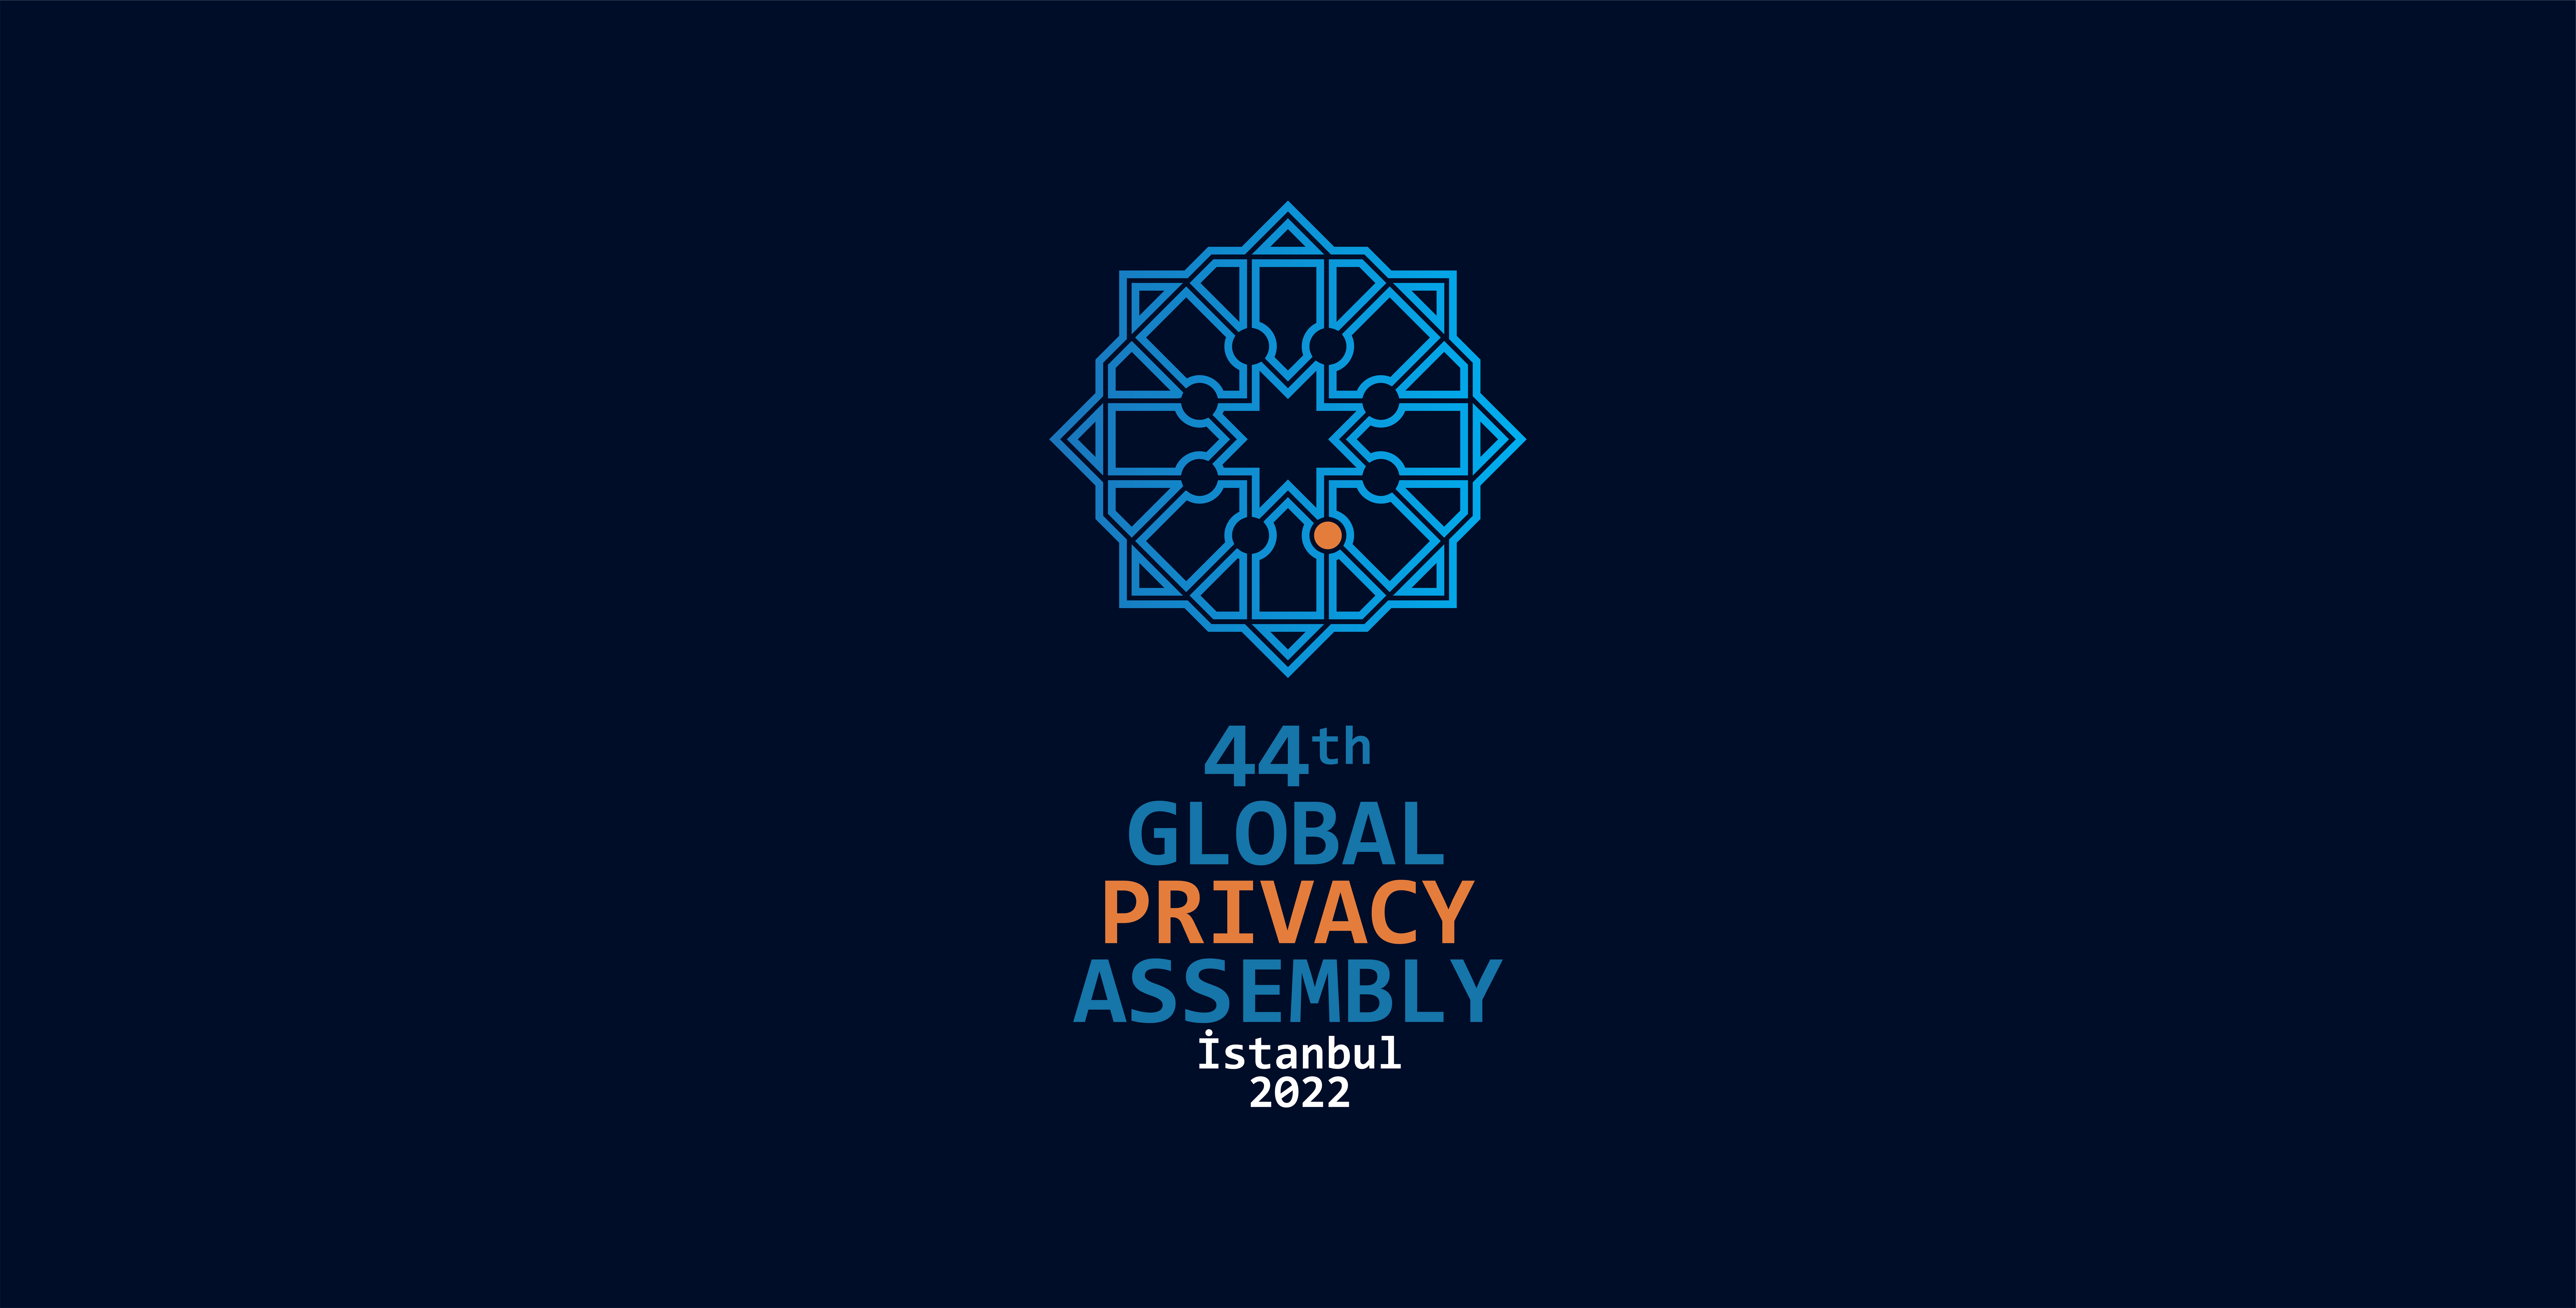 Co-Directors Prof. Kuner and Prof. Malgieri speakers at 44th Global Privacy Assembly